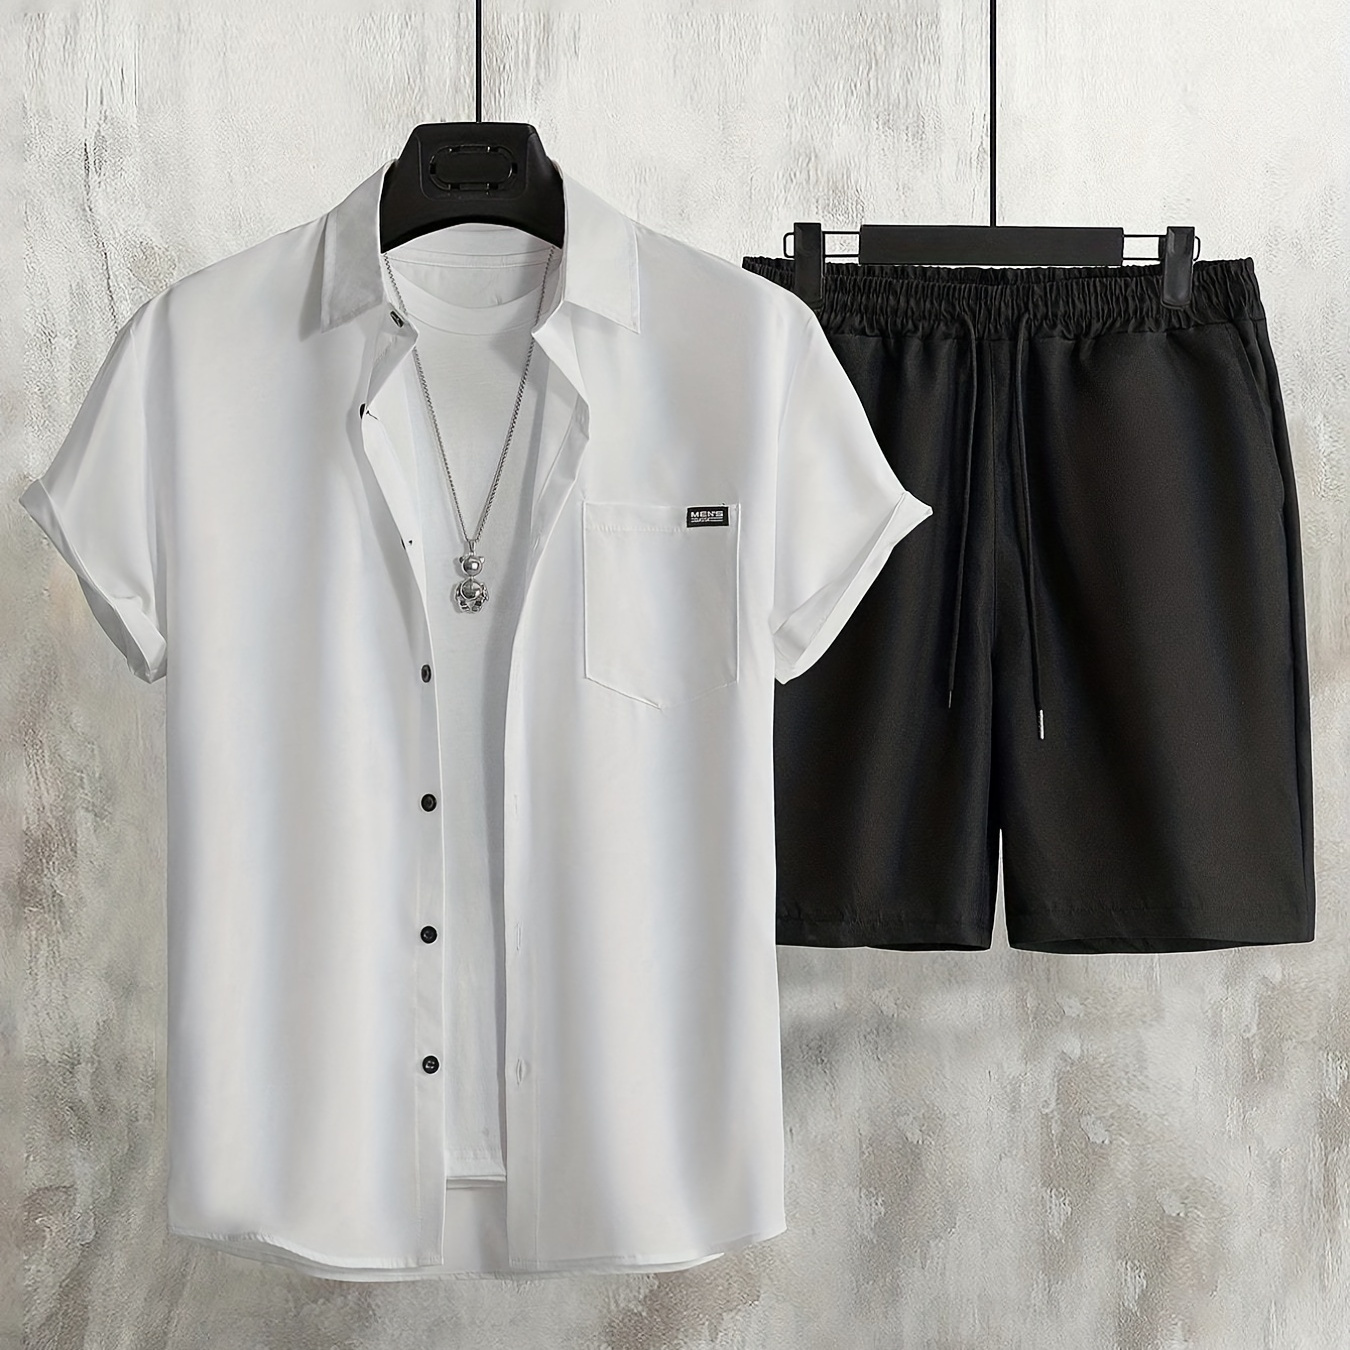 

Men's 2pcs Outfits, Casual Lapel Button Up Short Sleeve Shirt And Drawstring Shorts Set For Summer, Men's Clothing For Daily Leisure Loungewear Vacation Resorts